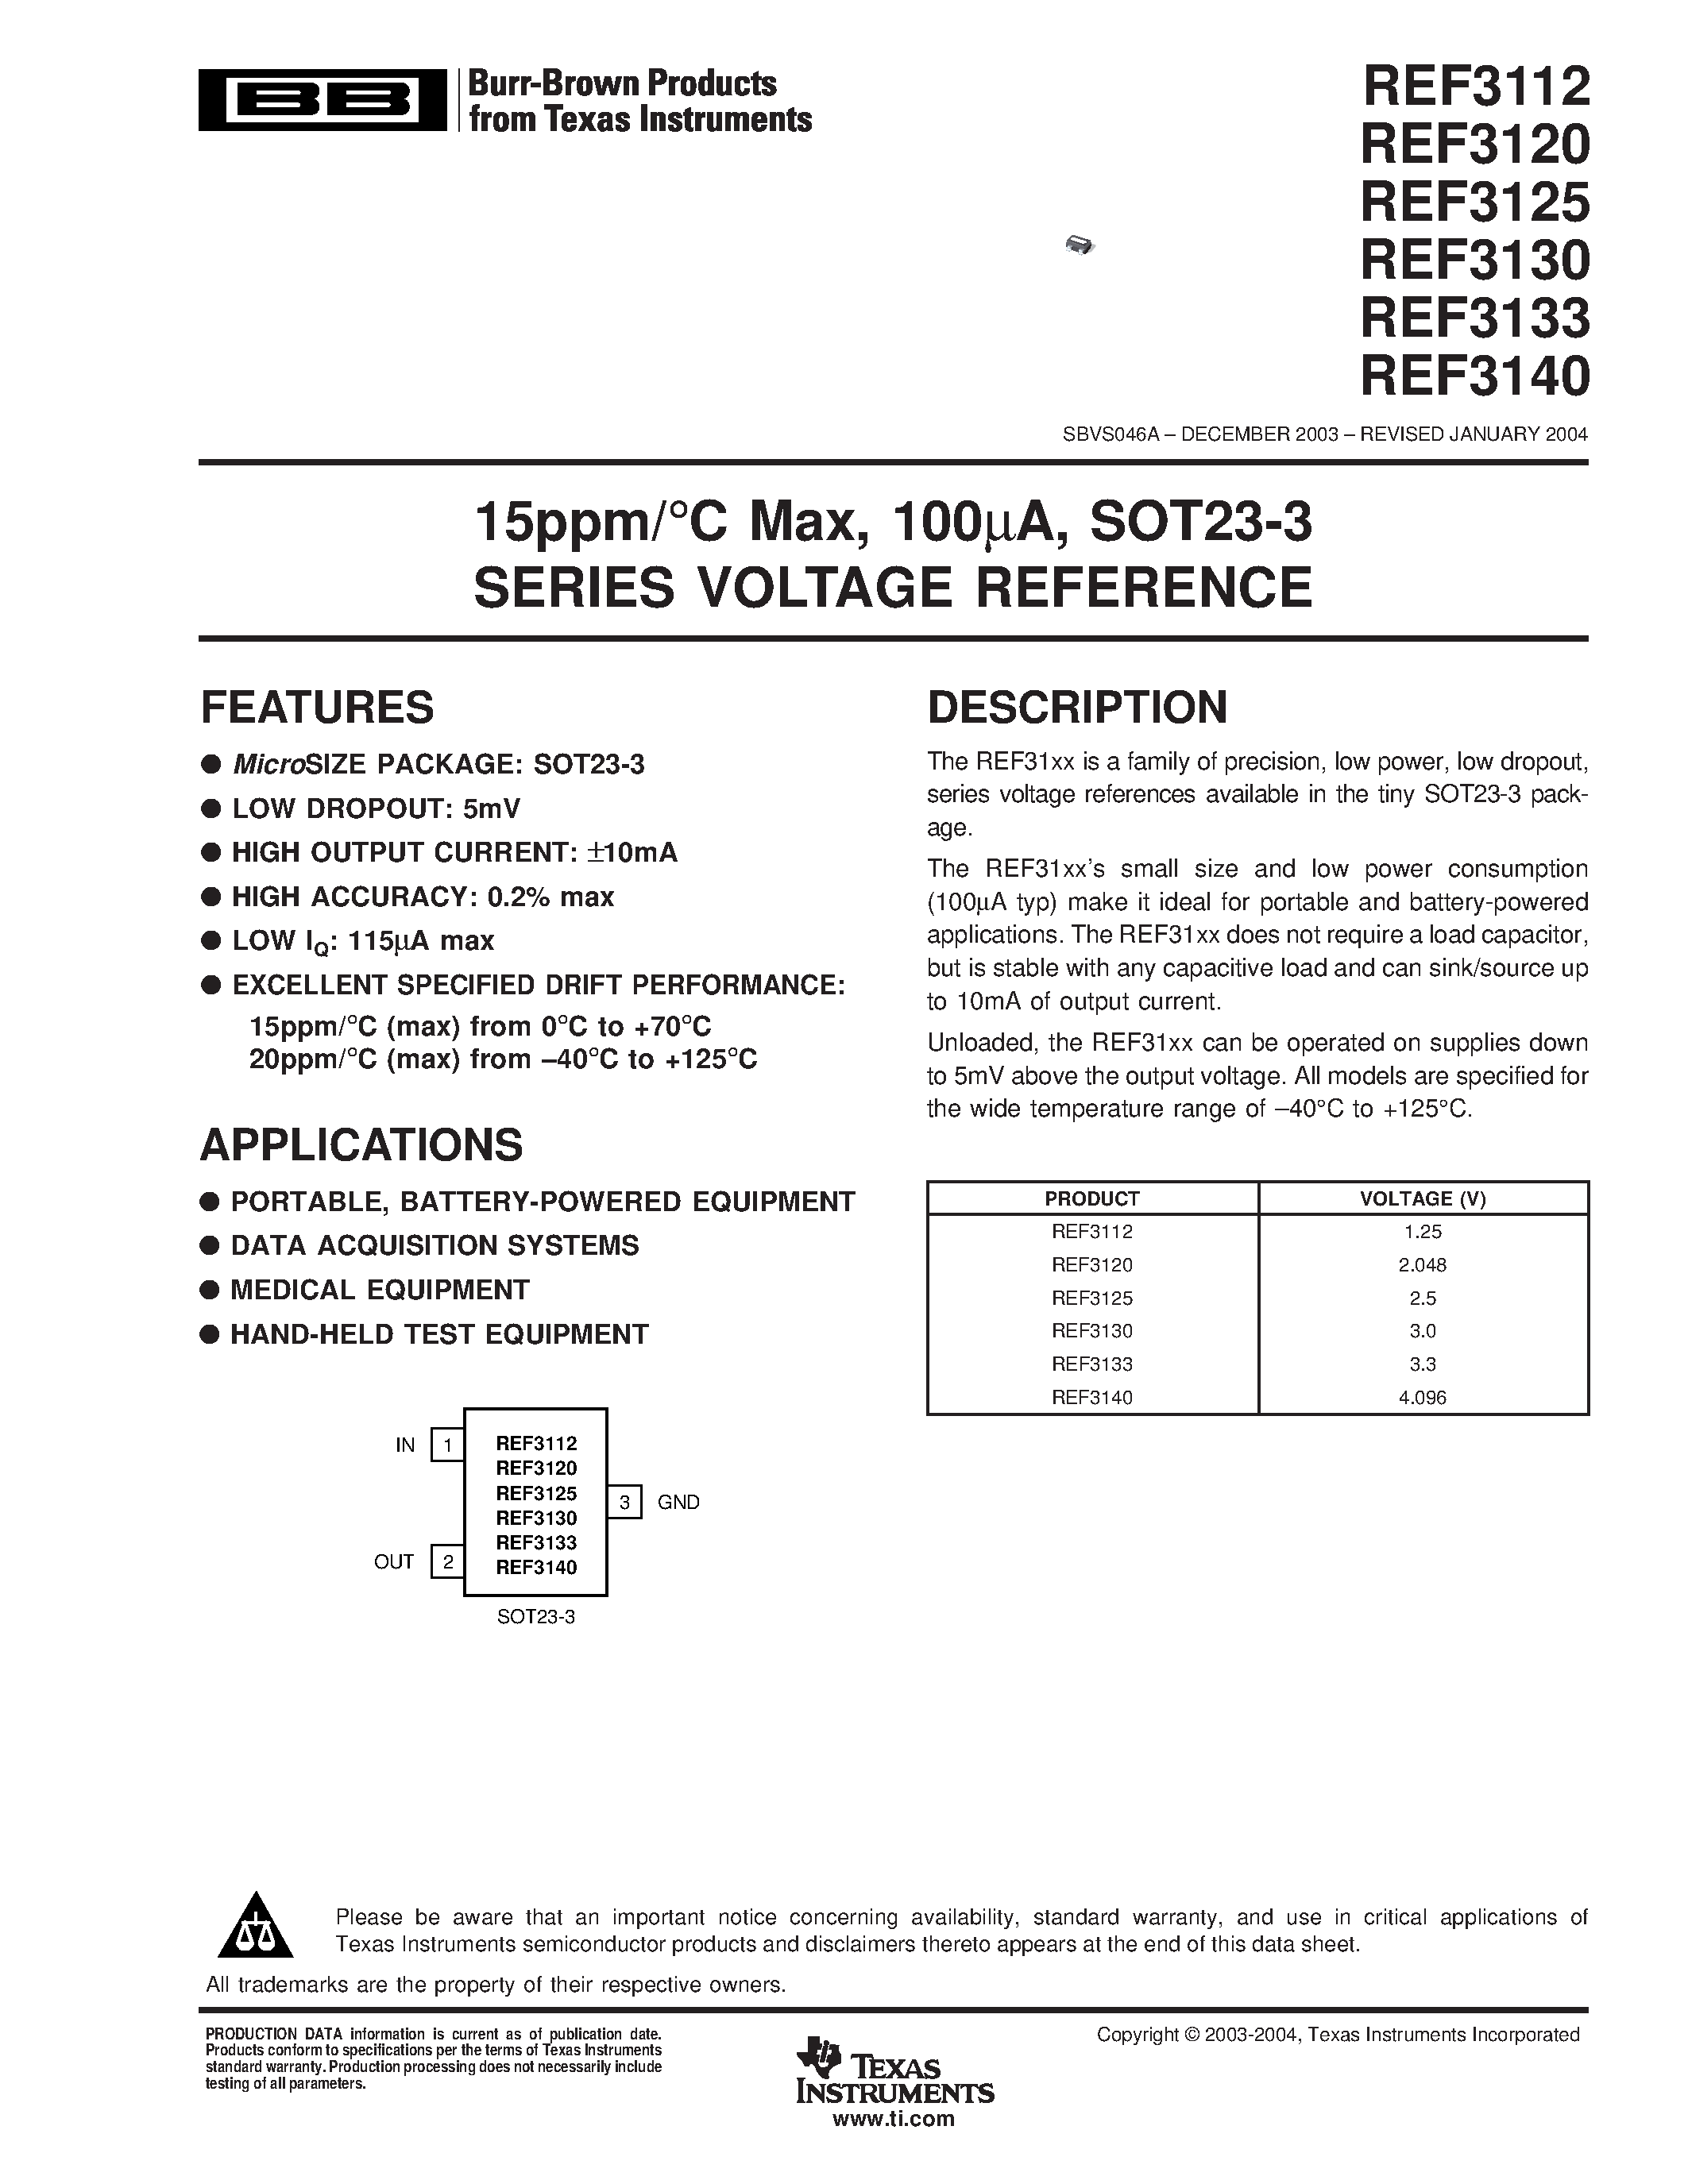 Даташит REF3130 - 15ppm/C Max/ 100UA/ SOT23-3 SERIES VOLTAGE REFERENCE страница 1